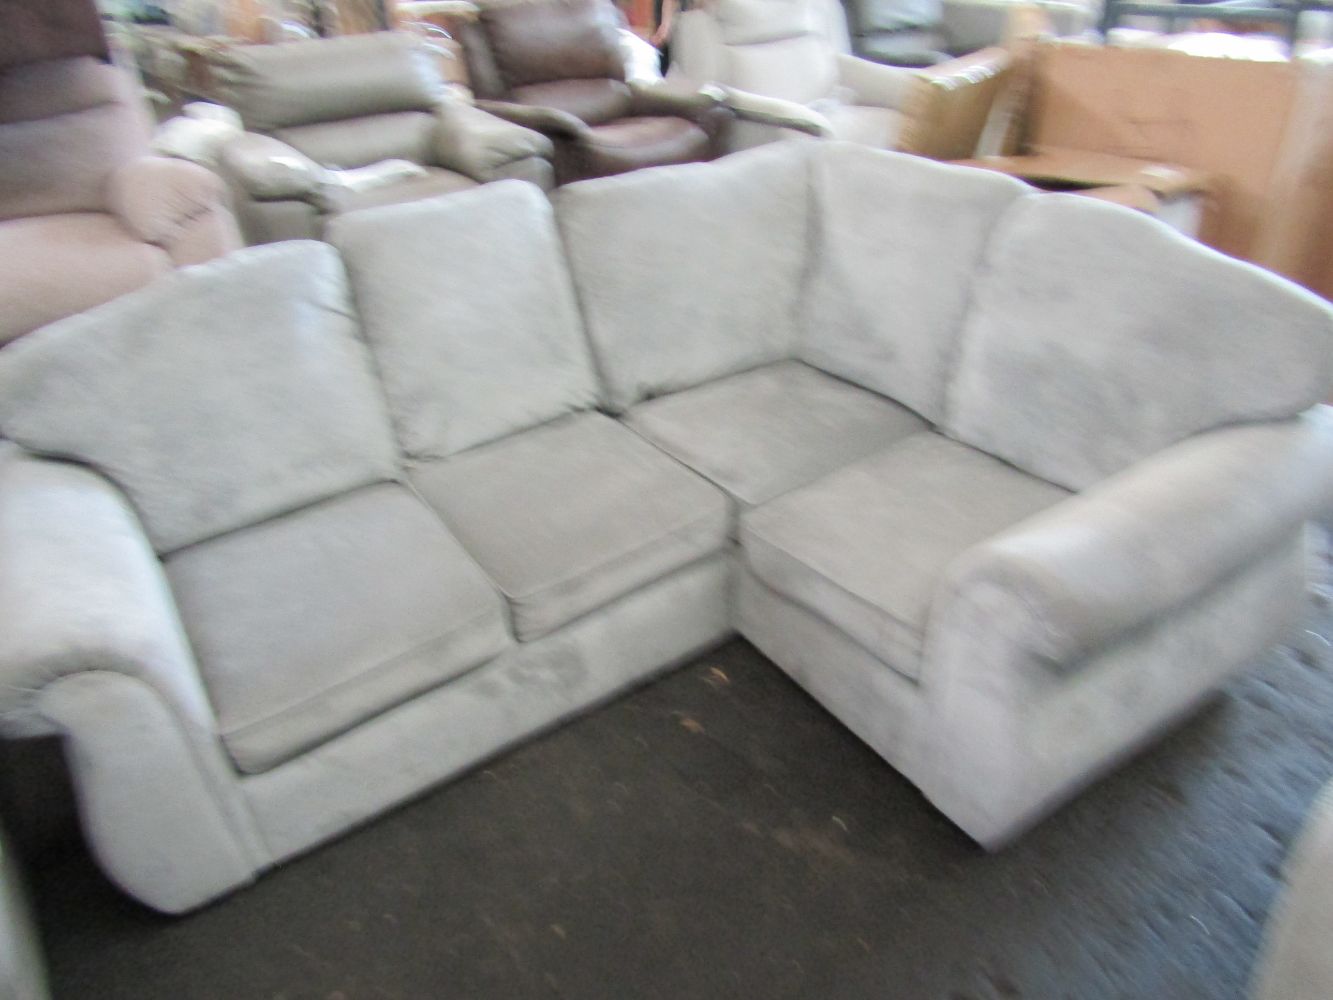 Sofas and Chairs from G Plan, SCS, Costco, Swoon, heals and more